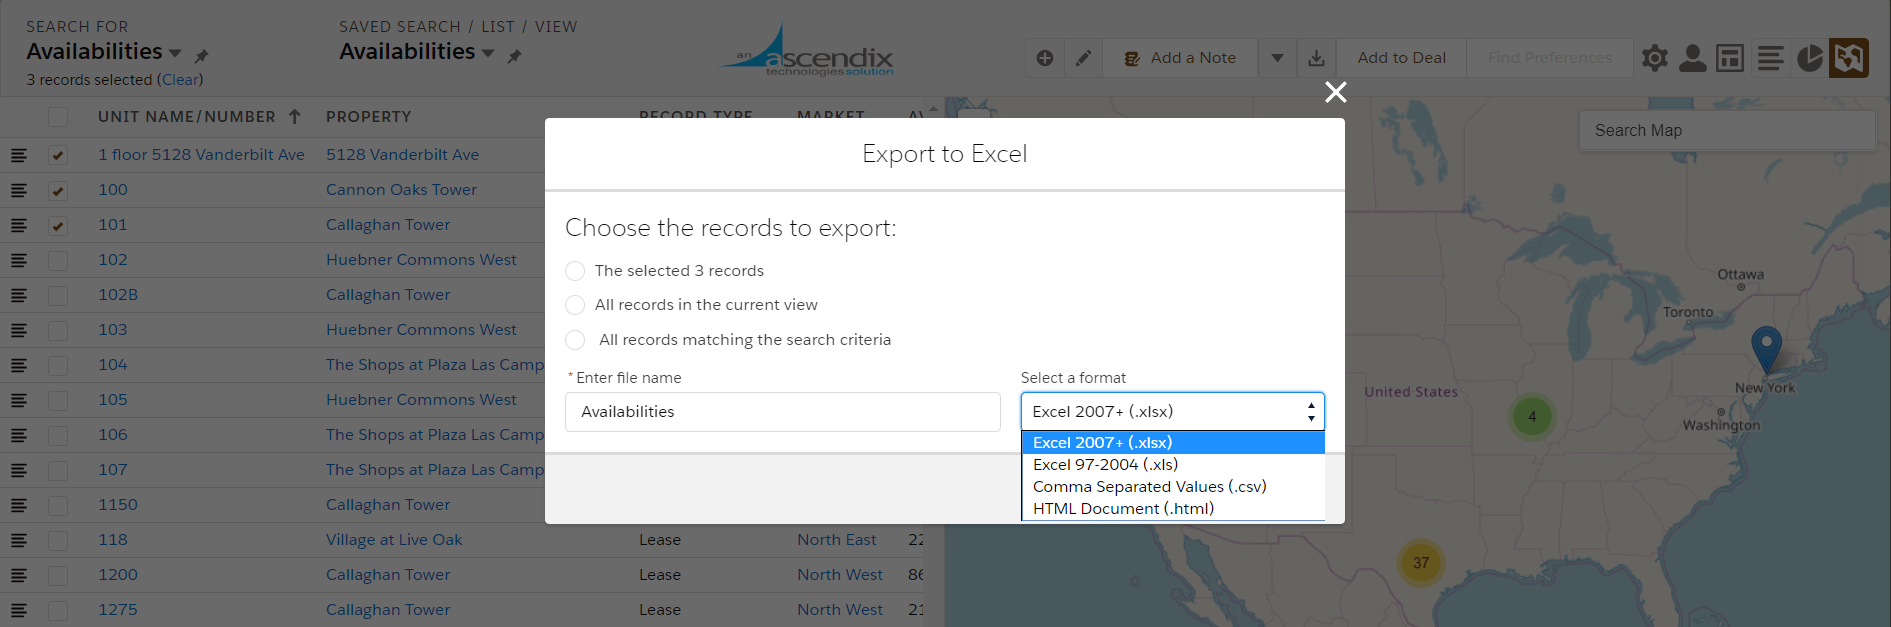 Data Export Formats in Ascendix Search